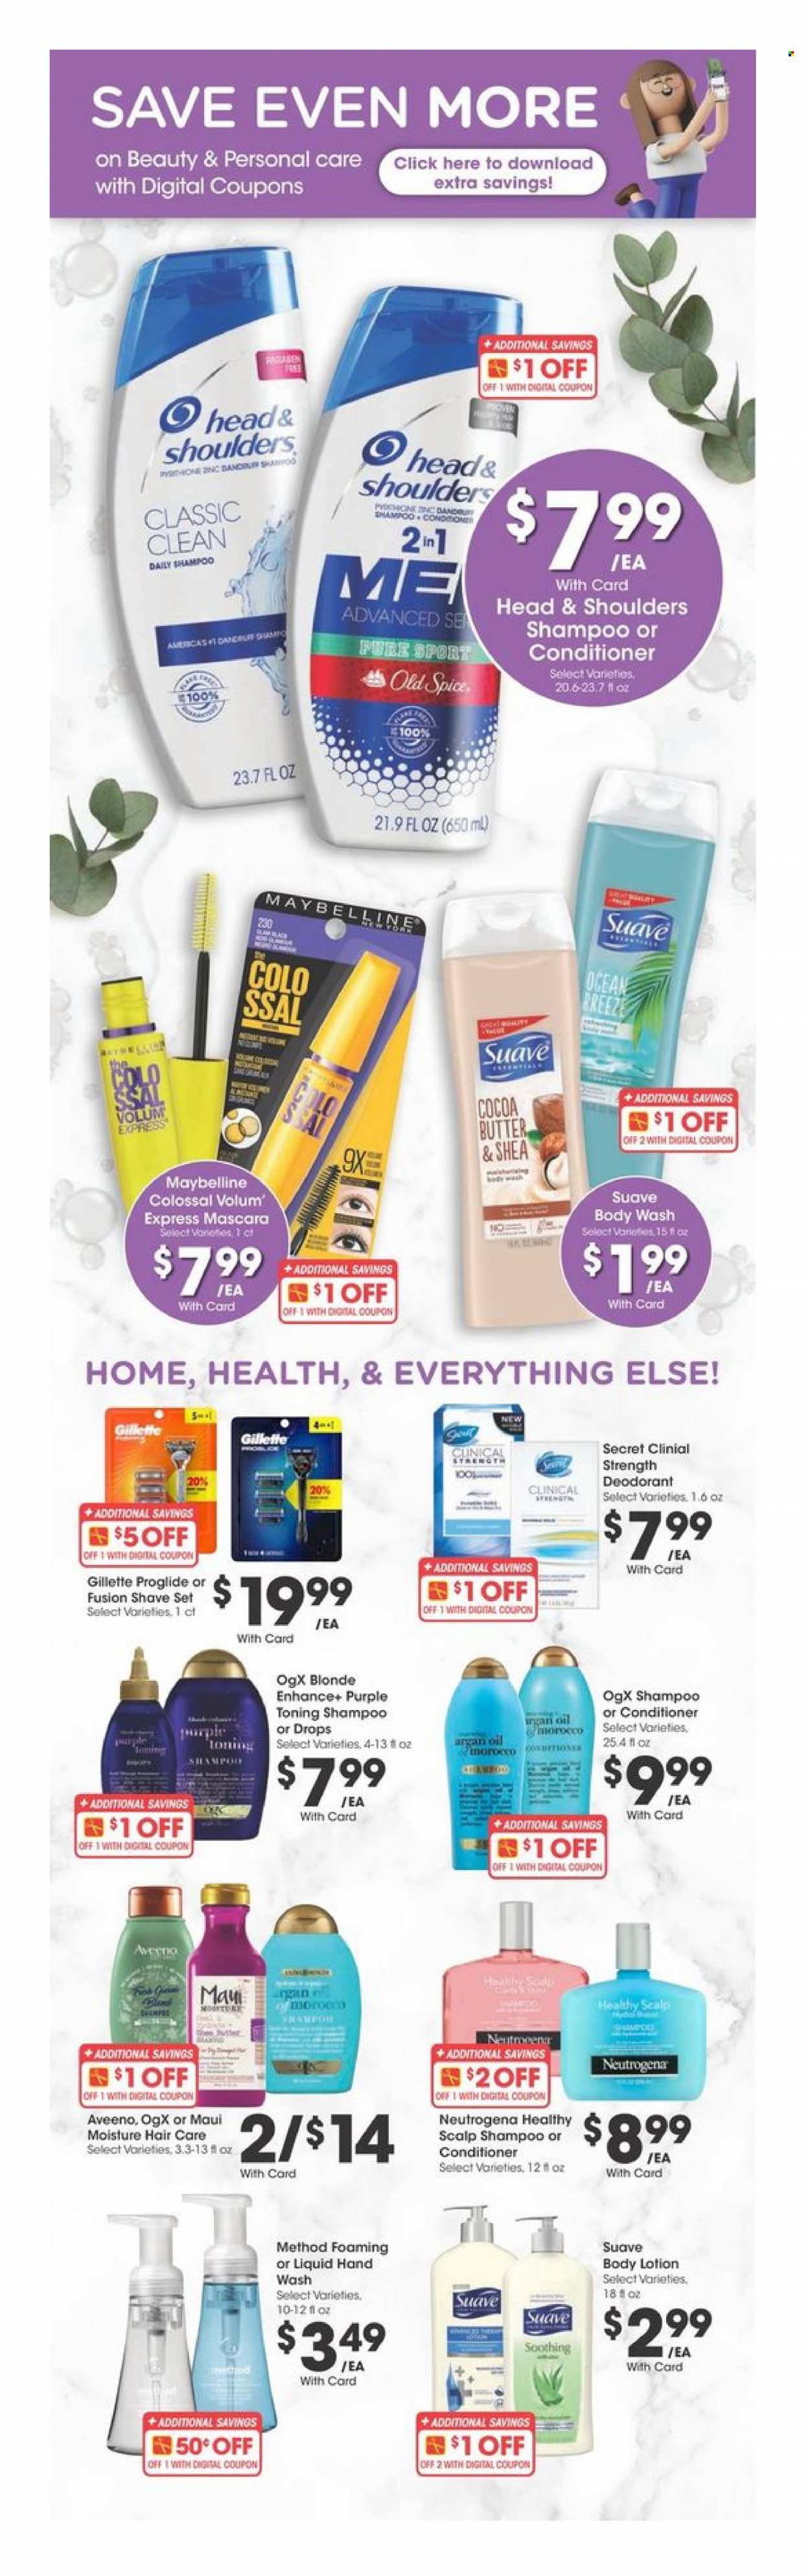 thumbnail - Smith's Flyer - 12/07/2021 - 01/04/2022 - Sales products - spice, oil, Aveeno, body wash, shampoo, Suave, Old Spice, hand wash, Neutrogena, OGX, conditioner, Head & Shoulders, Maui Moisture, body lotion, anti-perspirant, deodorant, Gillette, mascara, Maybelline. Page 1.